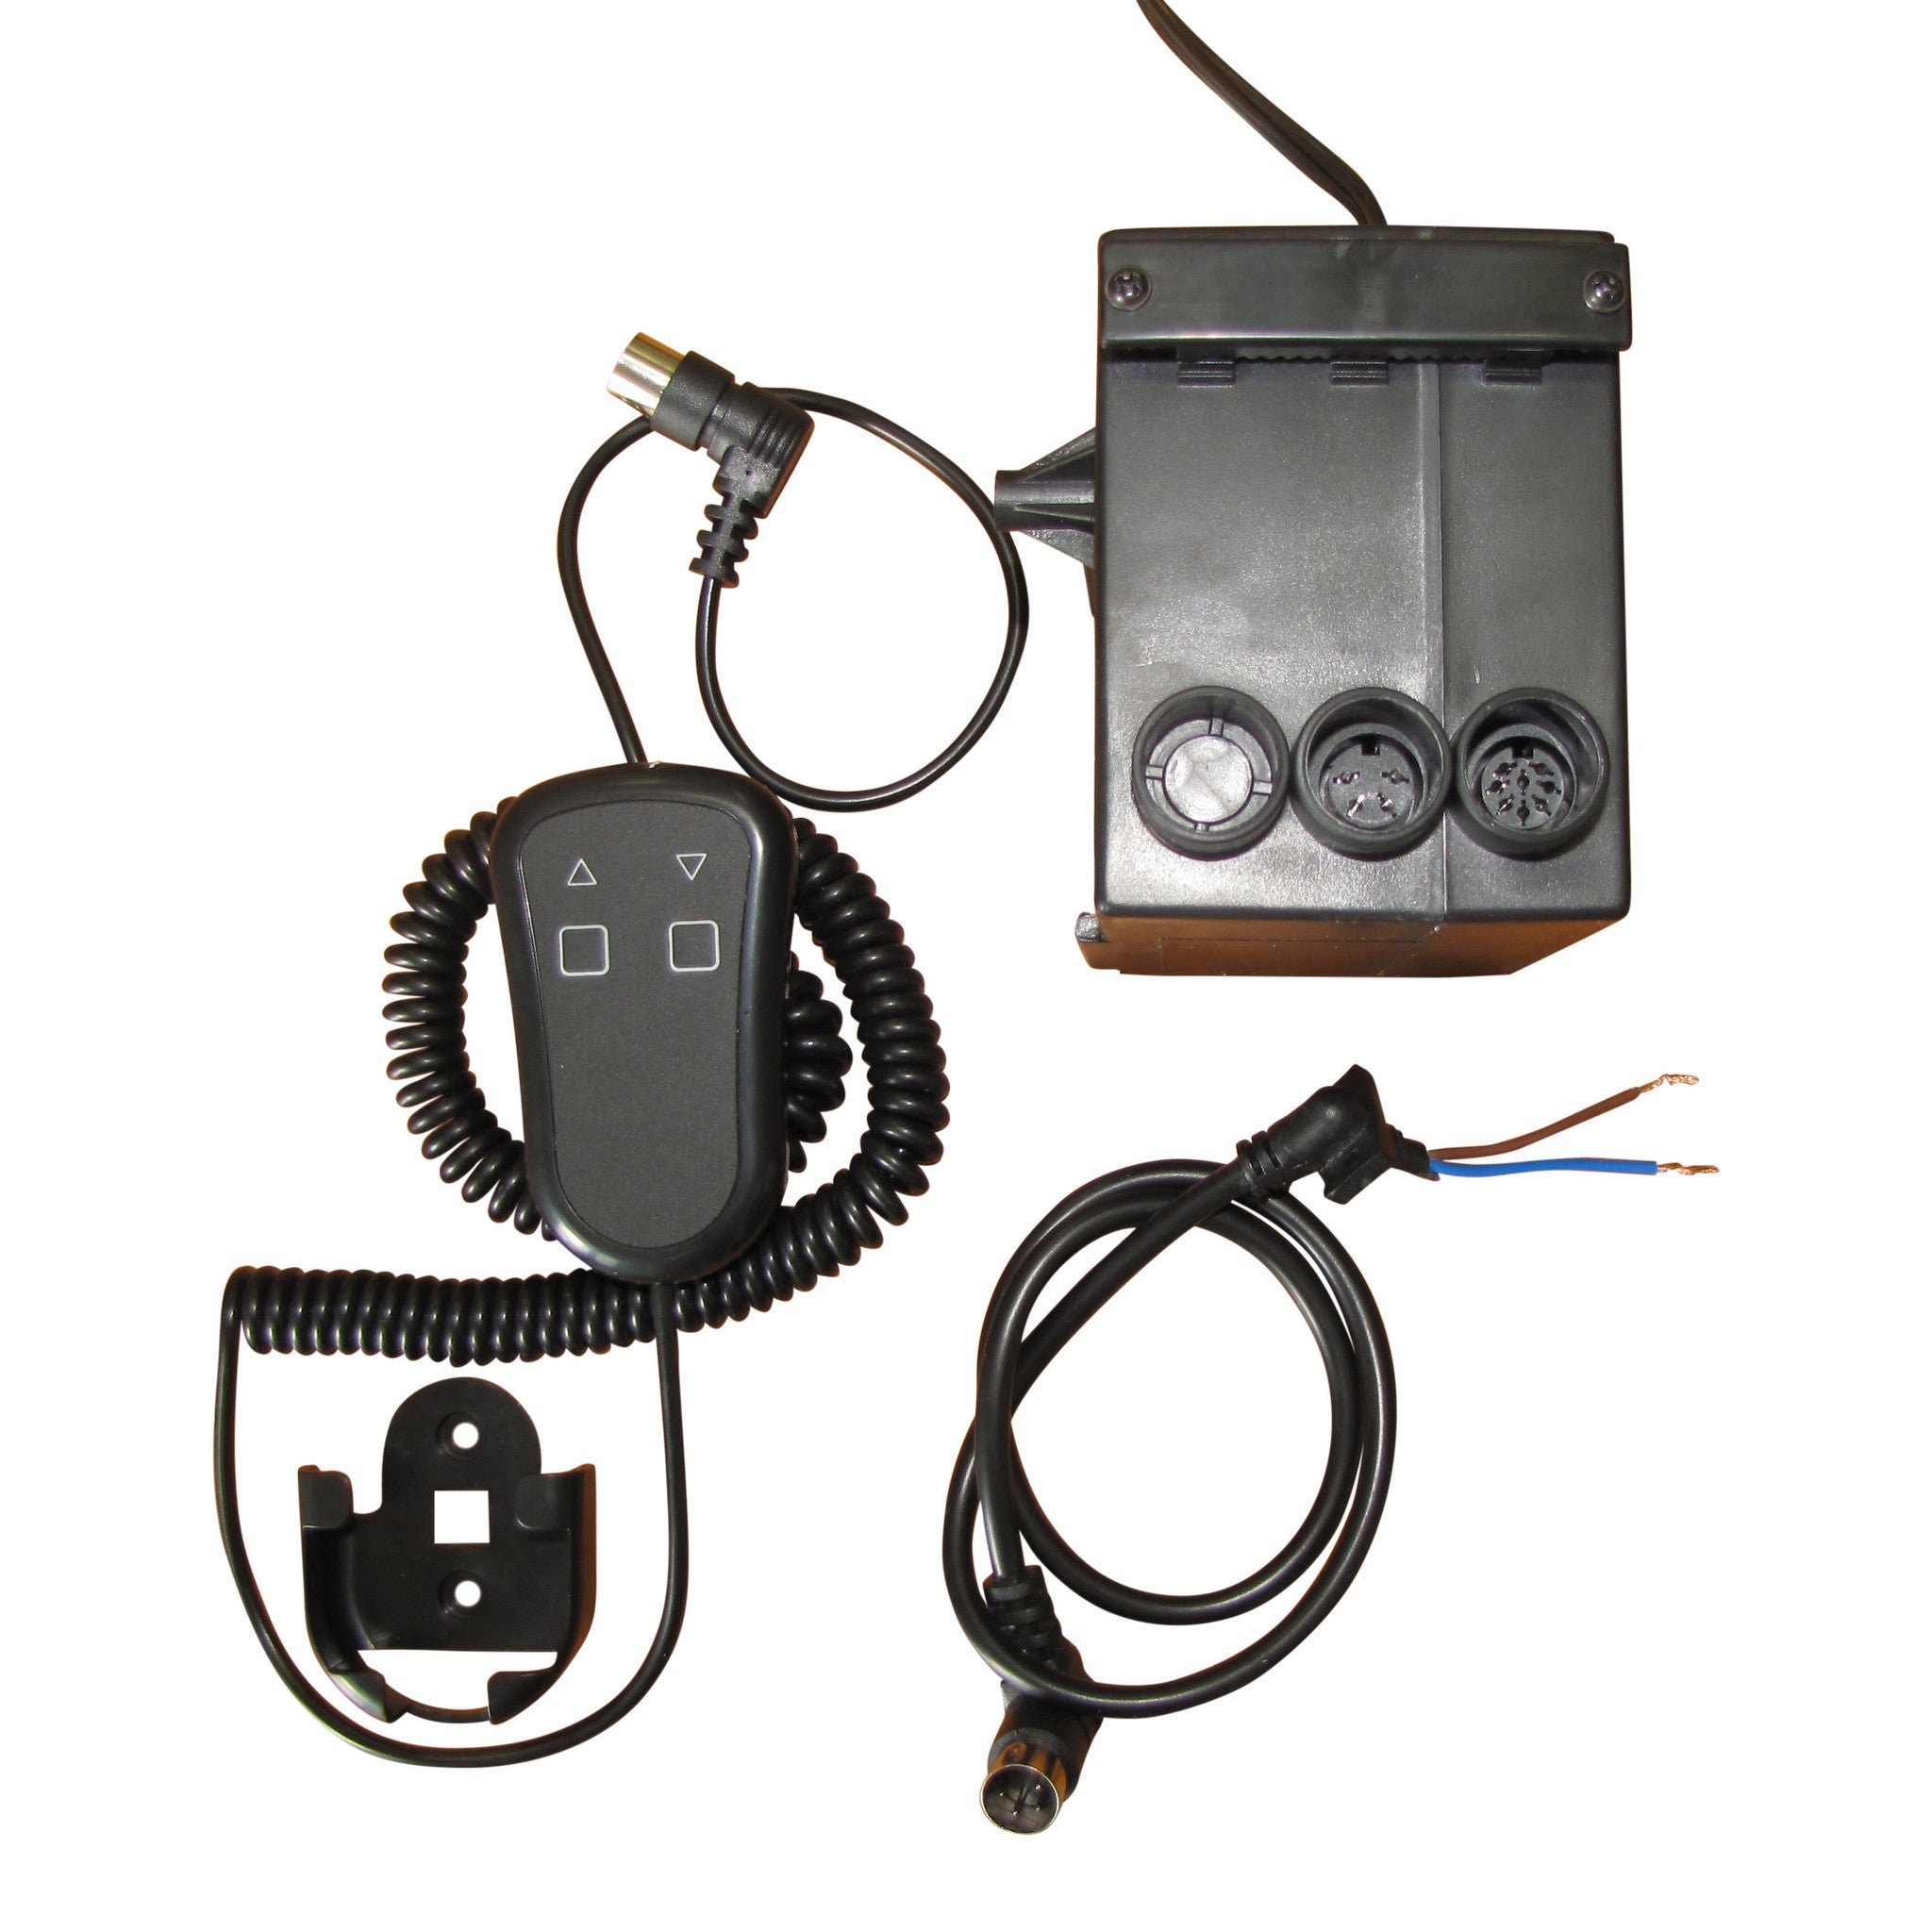 Handheld Wired Control System for Actuators - CSPS Product Image